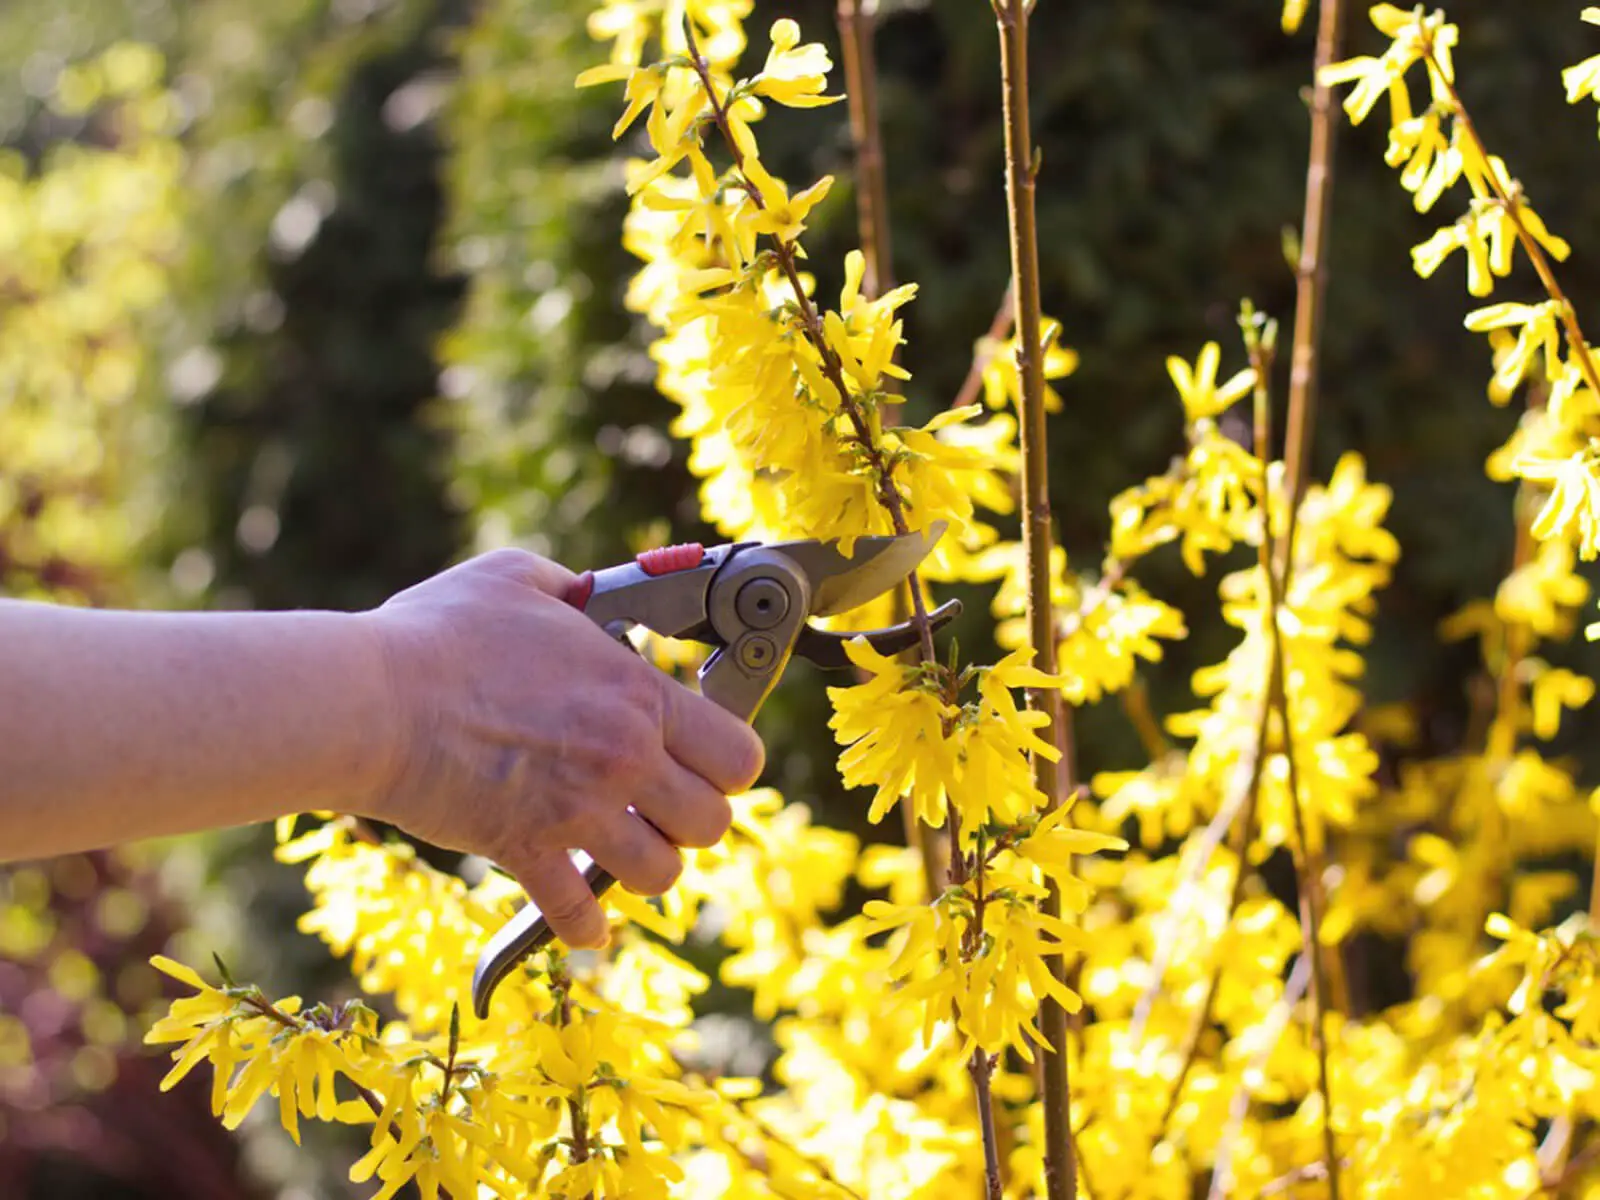 The best way to get rid of the Forsythia plant